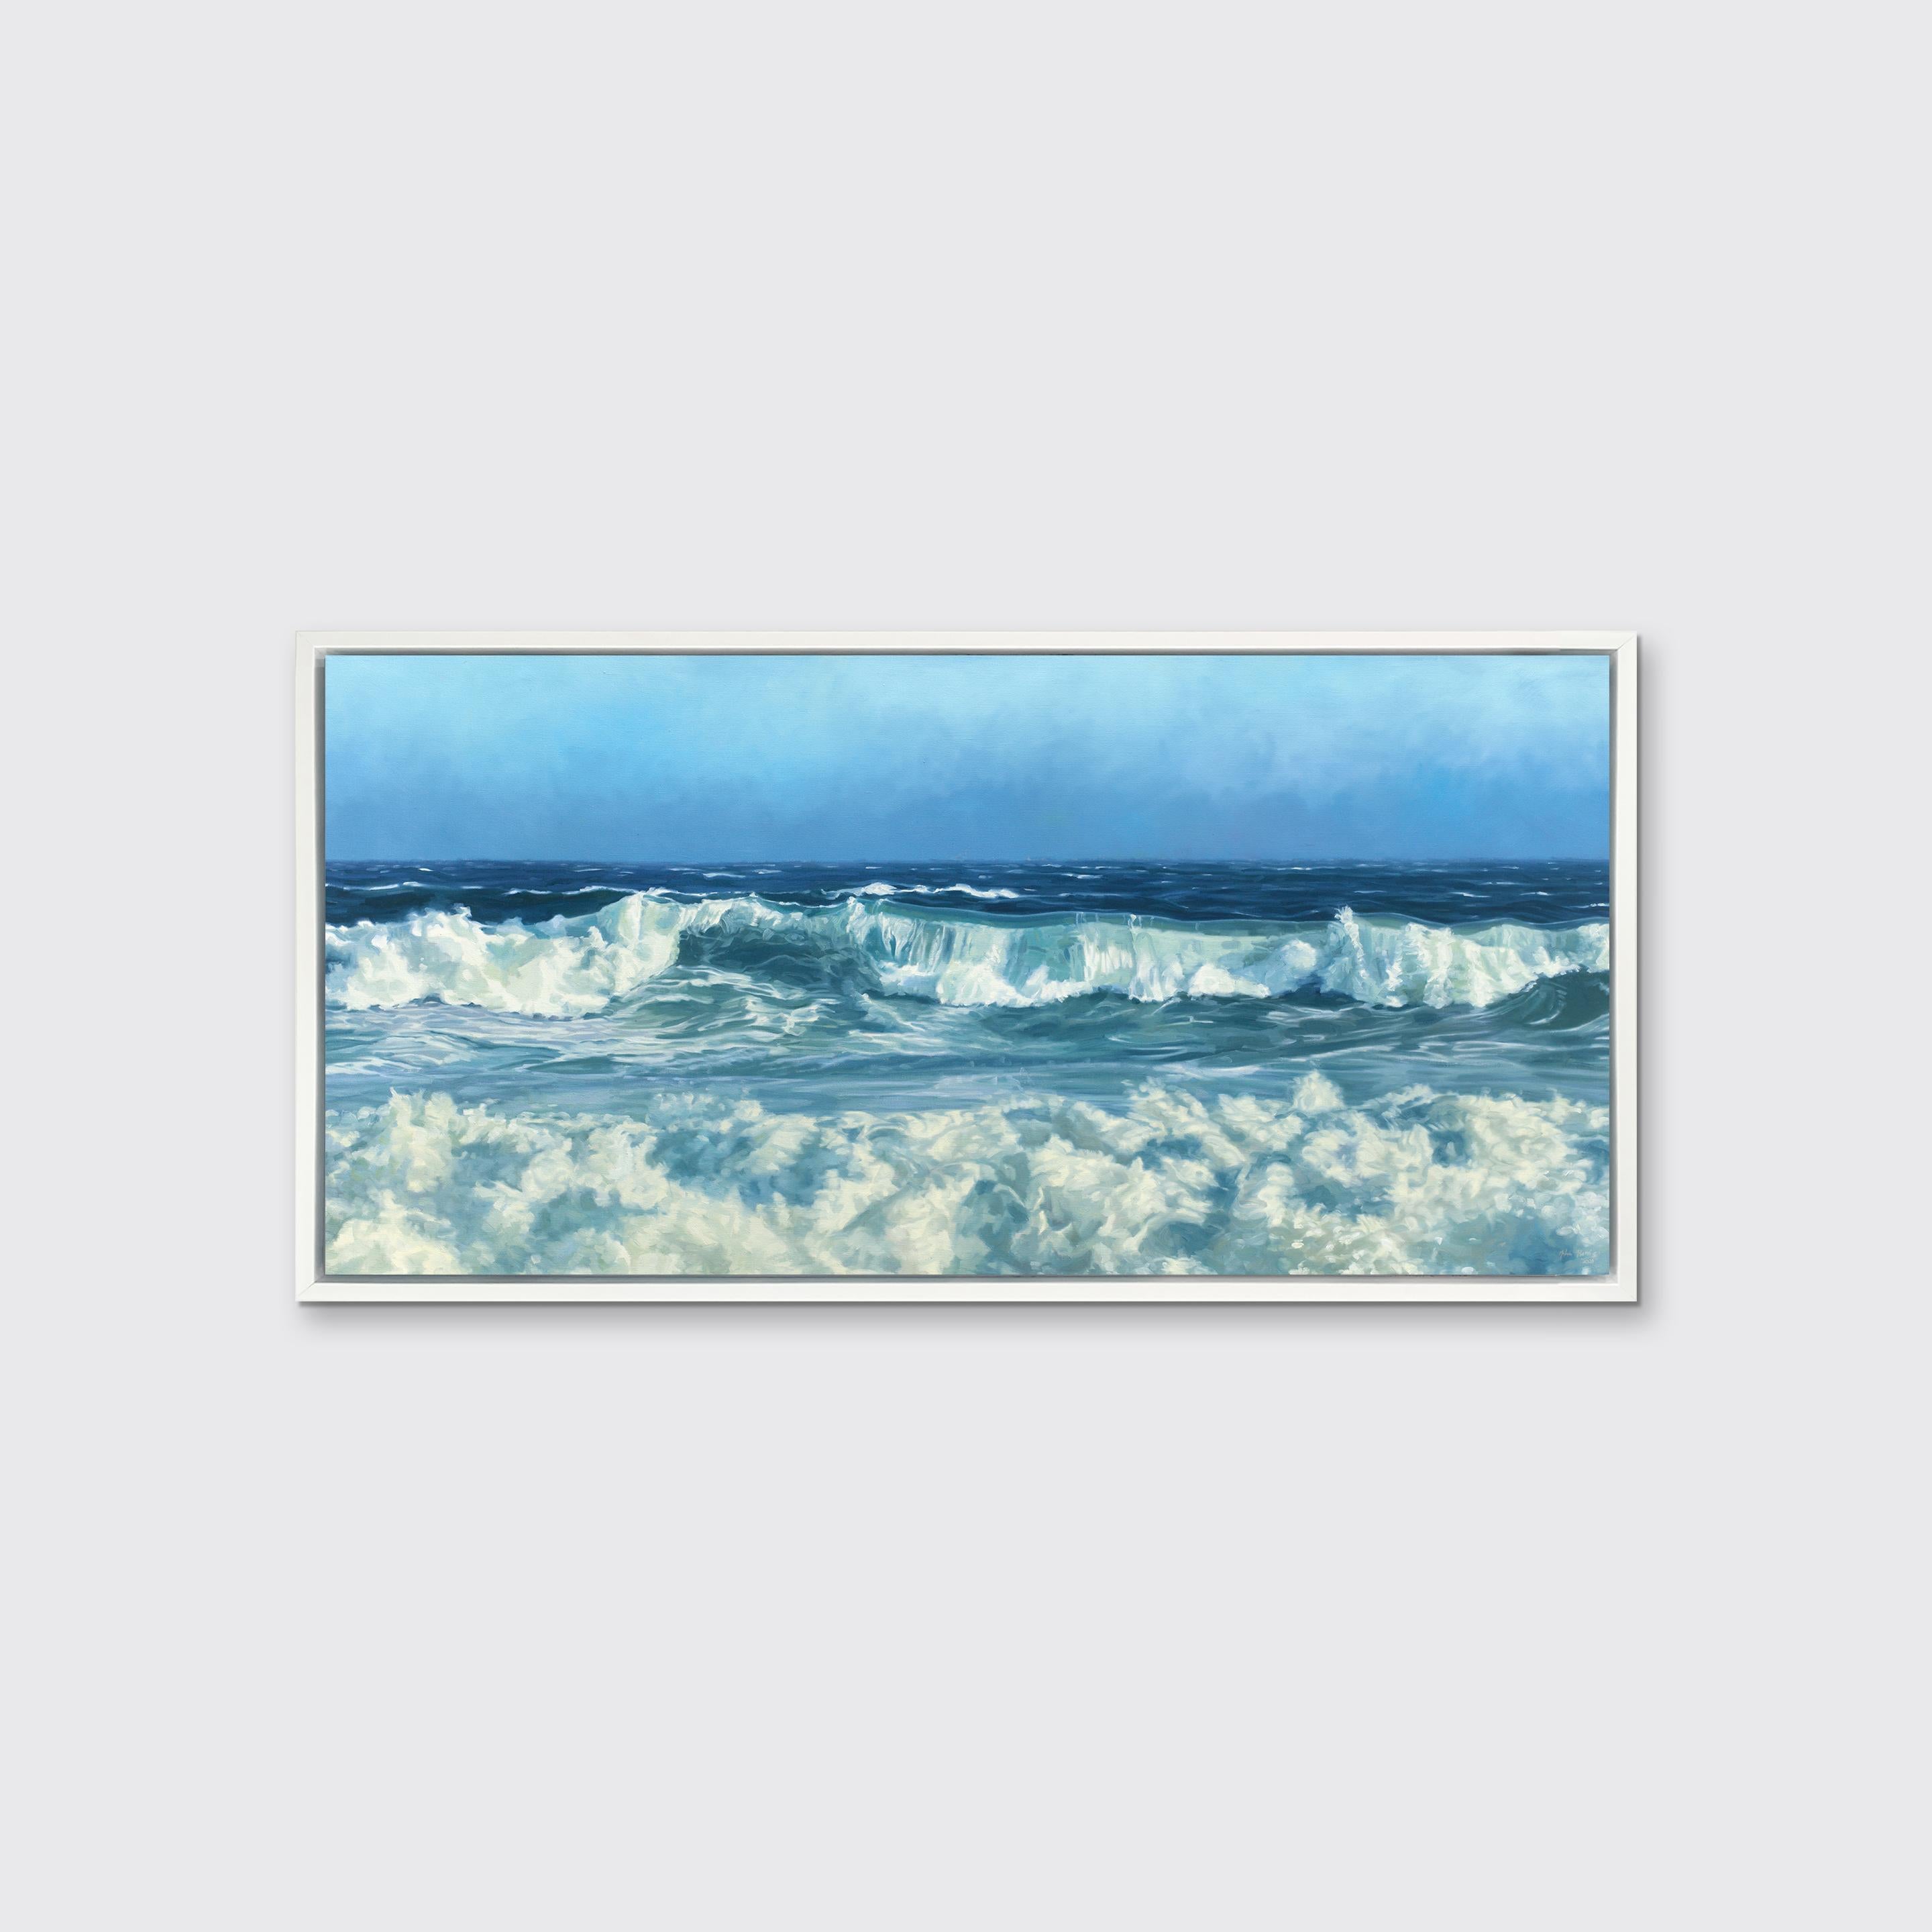 This coastal seascape limited edition print captures a cropped view of rolling waves below an ocean horizon line and a clear blue sky. Highly detailed and realistic, it balances the deep blues of the ocean with white foam and mist created by lightly